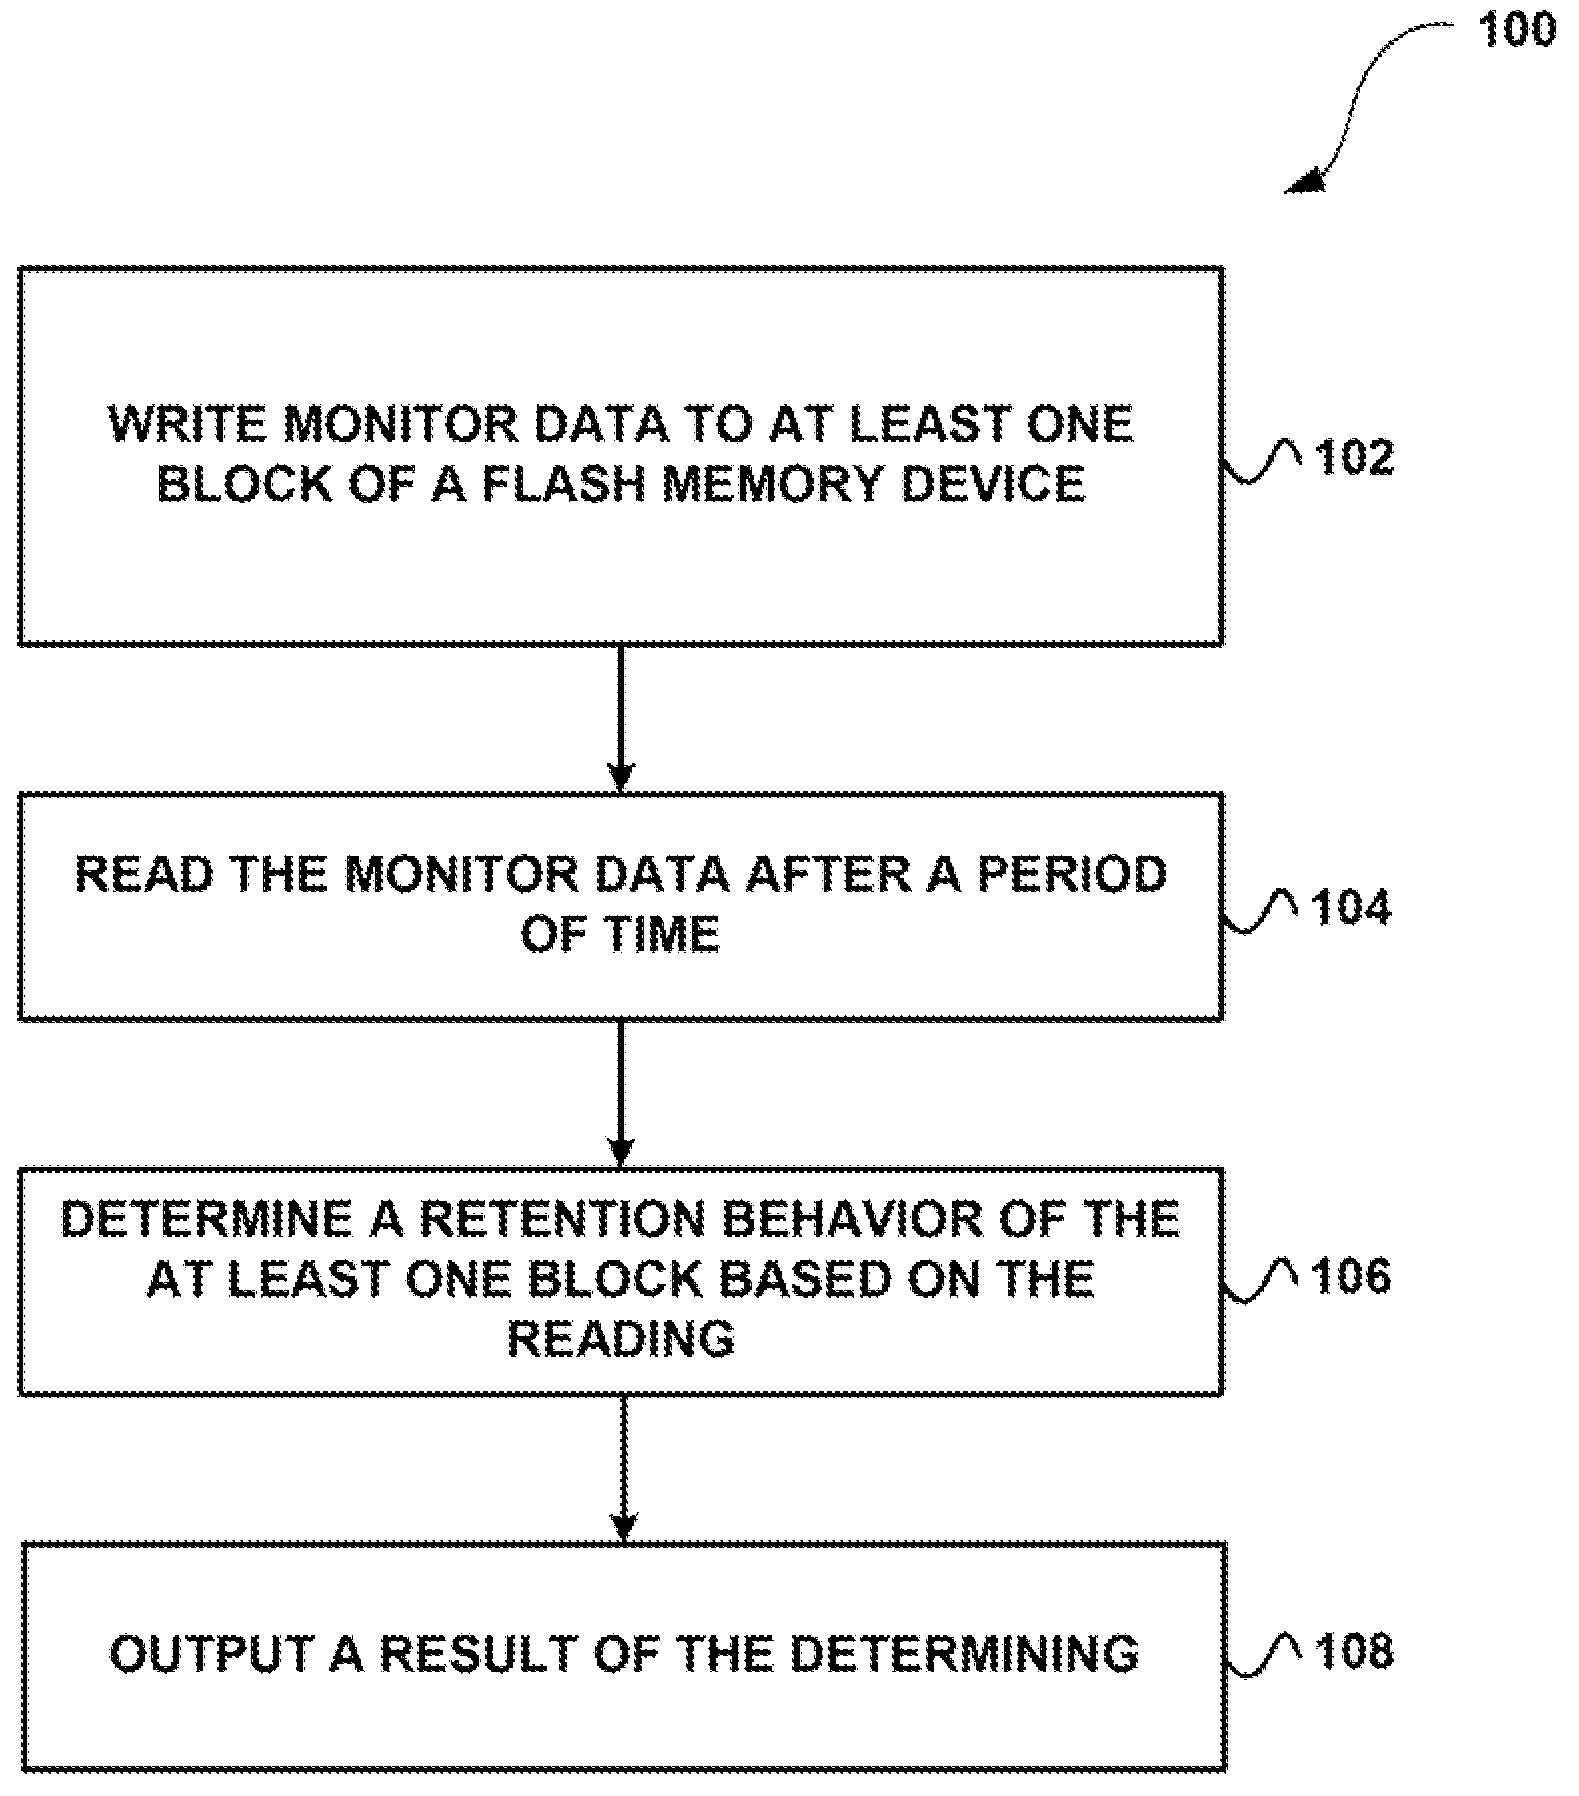 System, method, and computer program product for analyzing monitor data information from a plurality of memory devices having finite endurance and/or retention